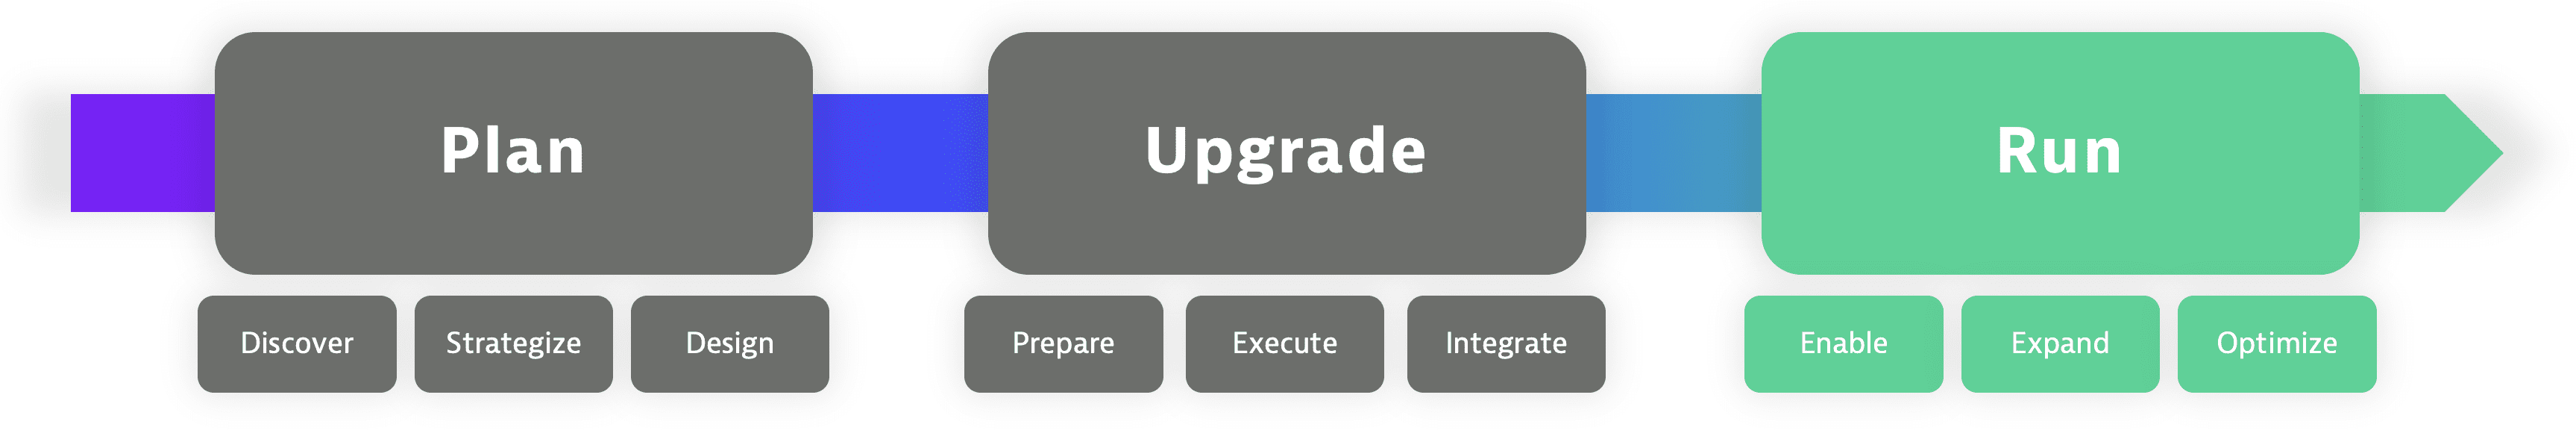 Actions after upgrading Managed to SaaS